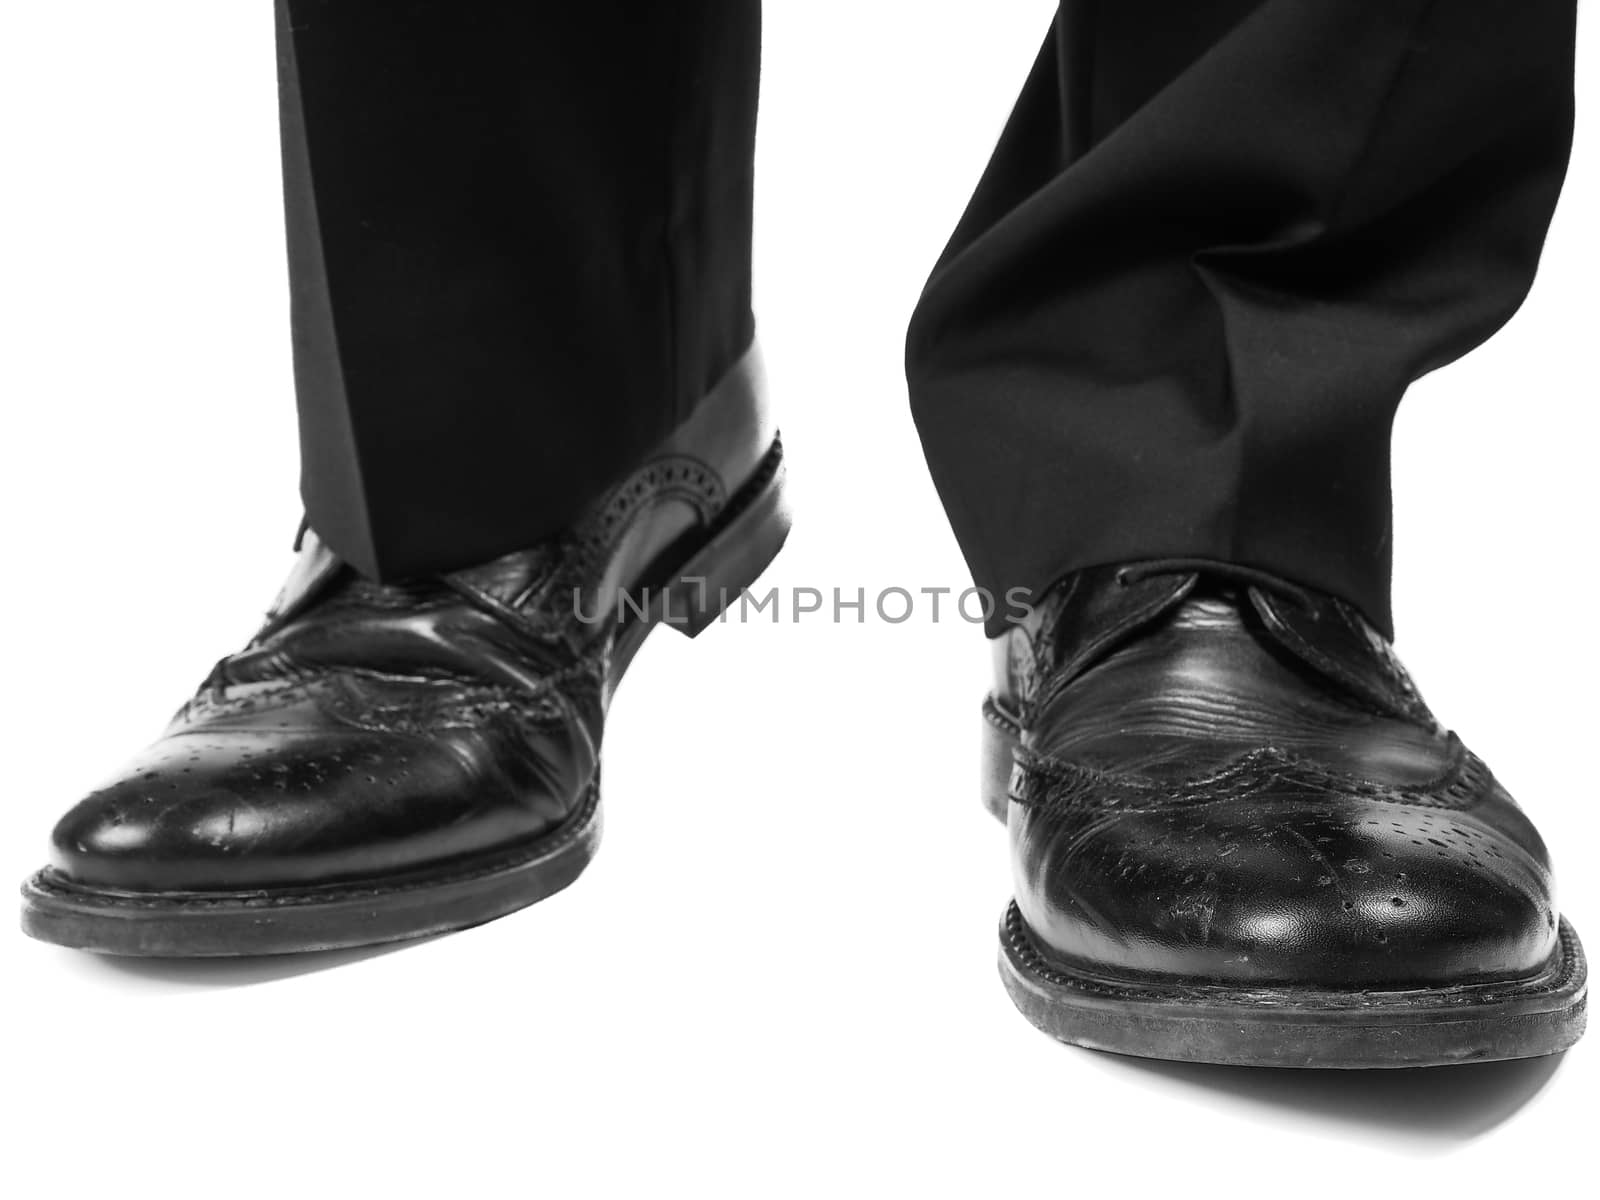 Masculine suit wearing shiny black leather shoes approaching towards white